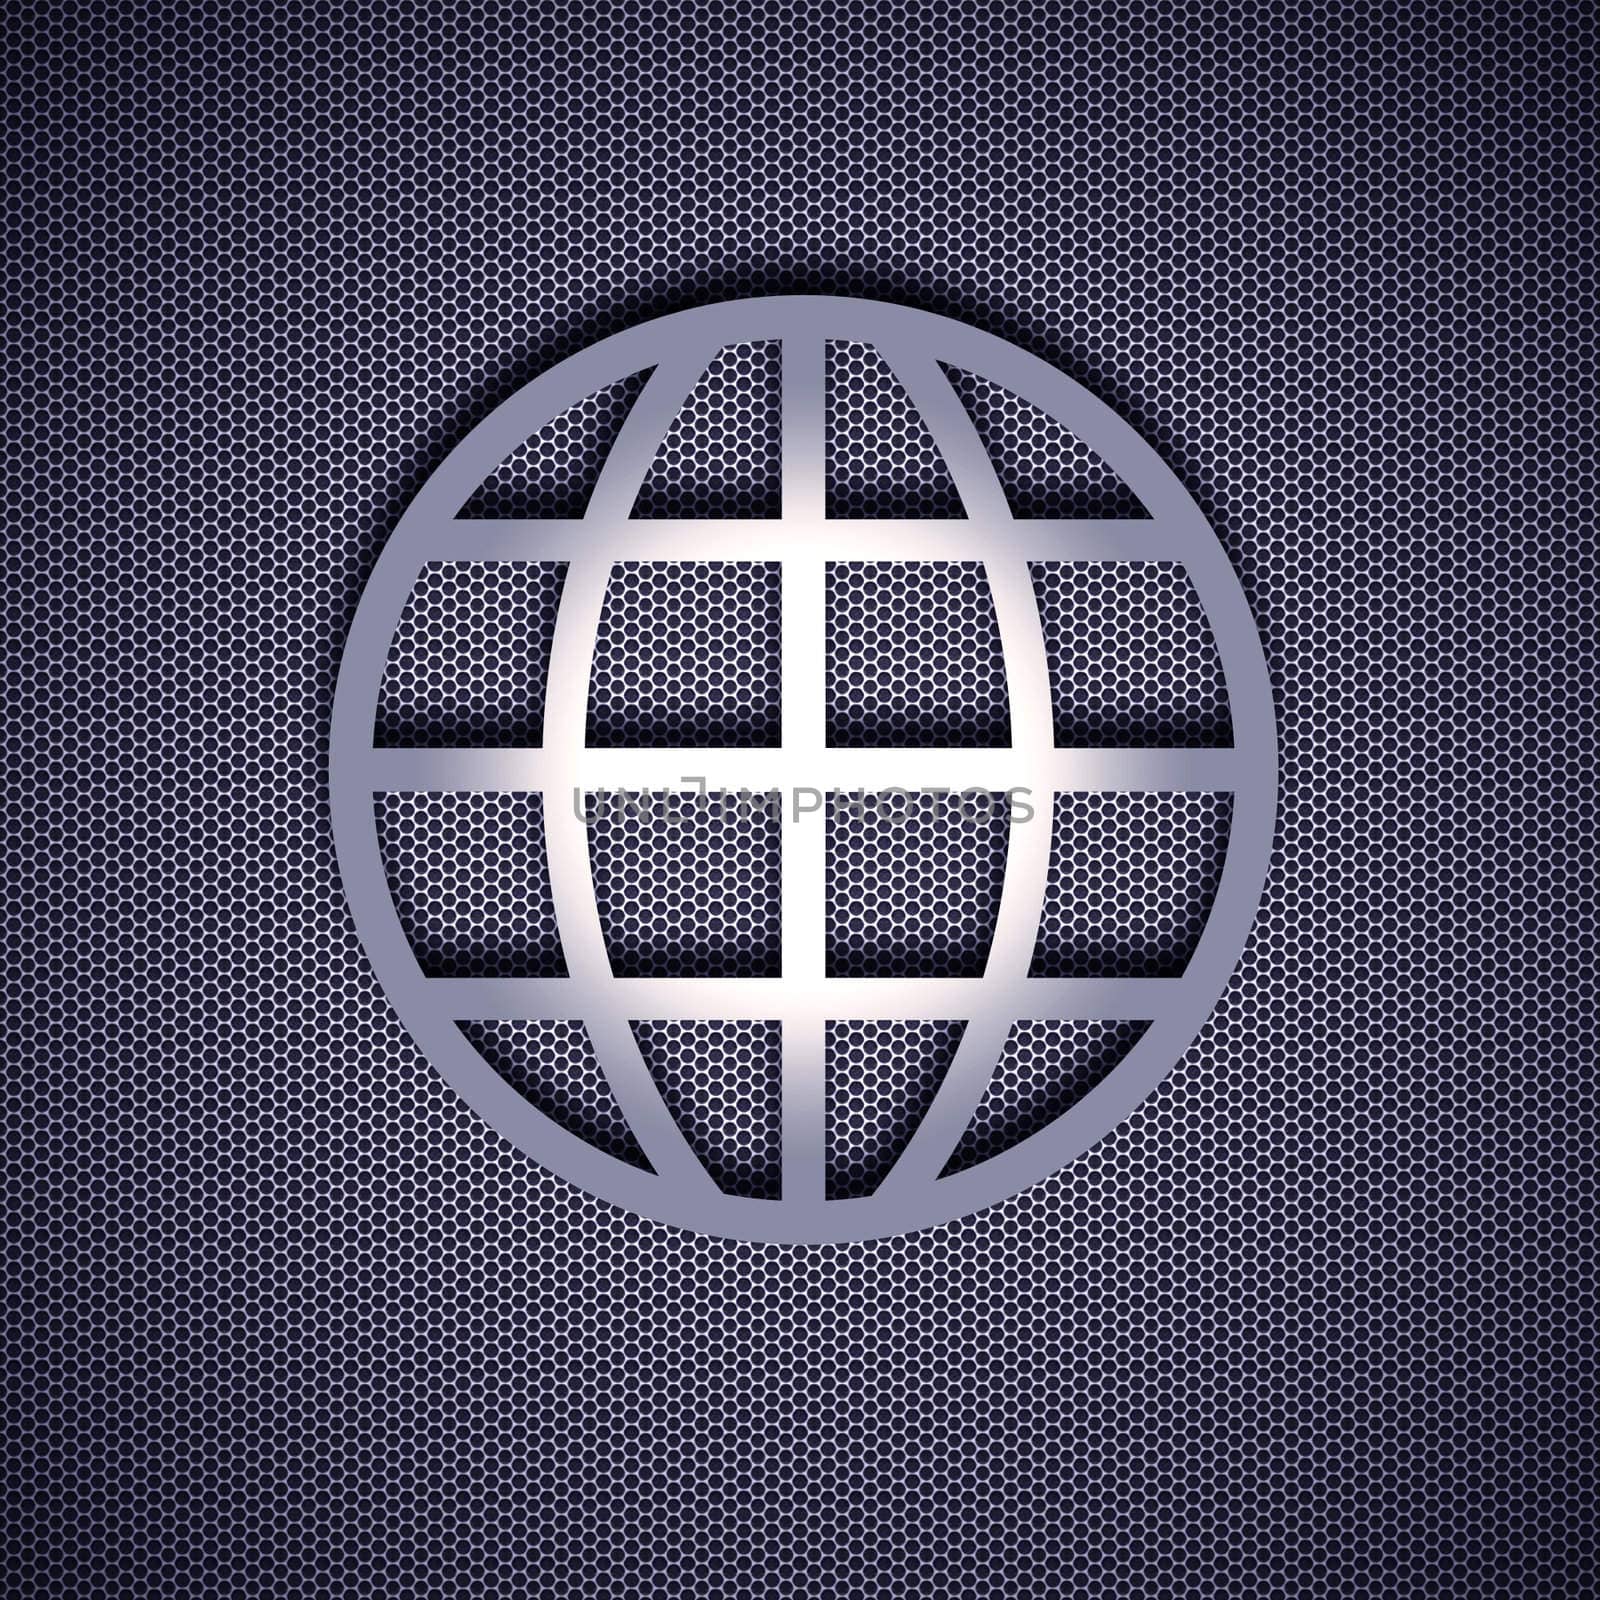 Globe symbol with 3d effect, symbol isolated on metal background. Steel background.